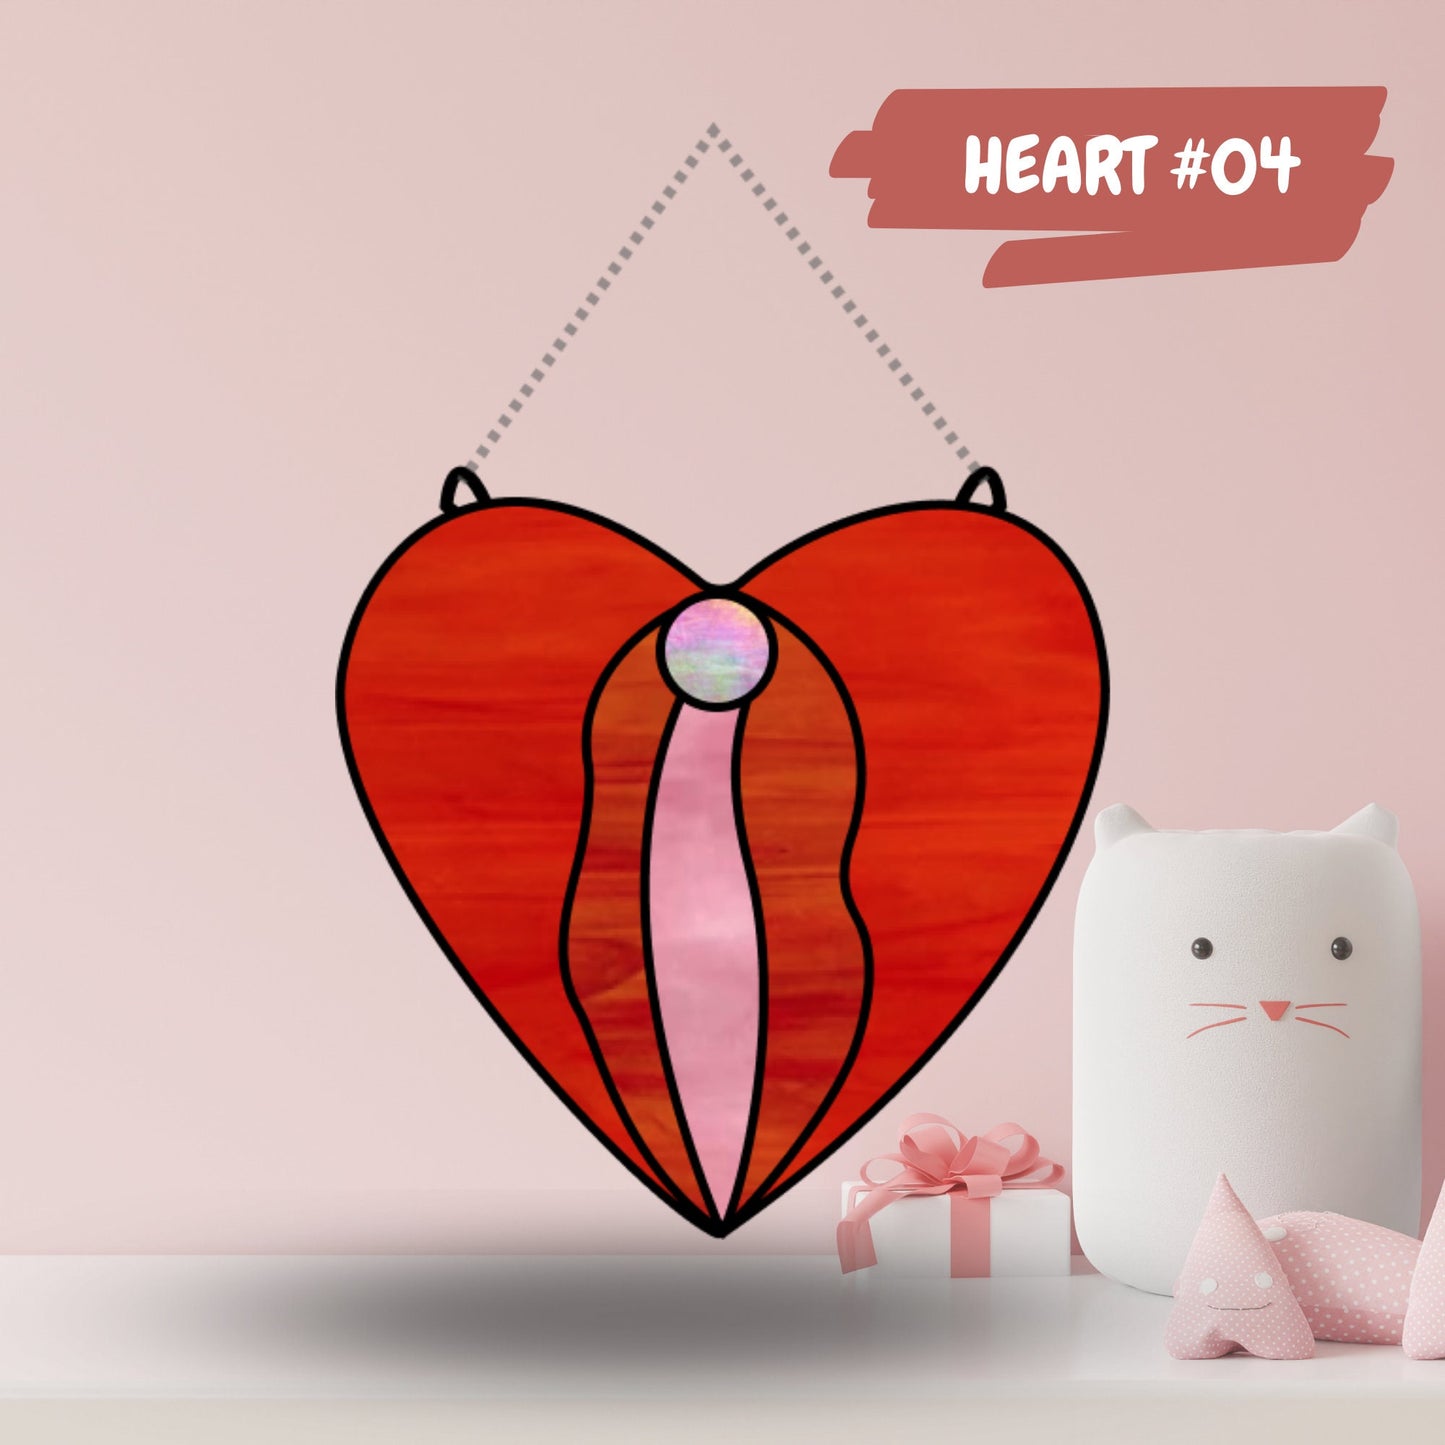 Yoni Stained Glass Heart Pattern - Vulva Stained Glass Pattern